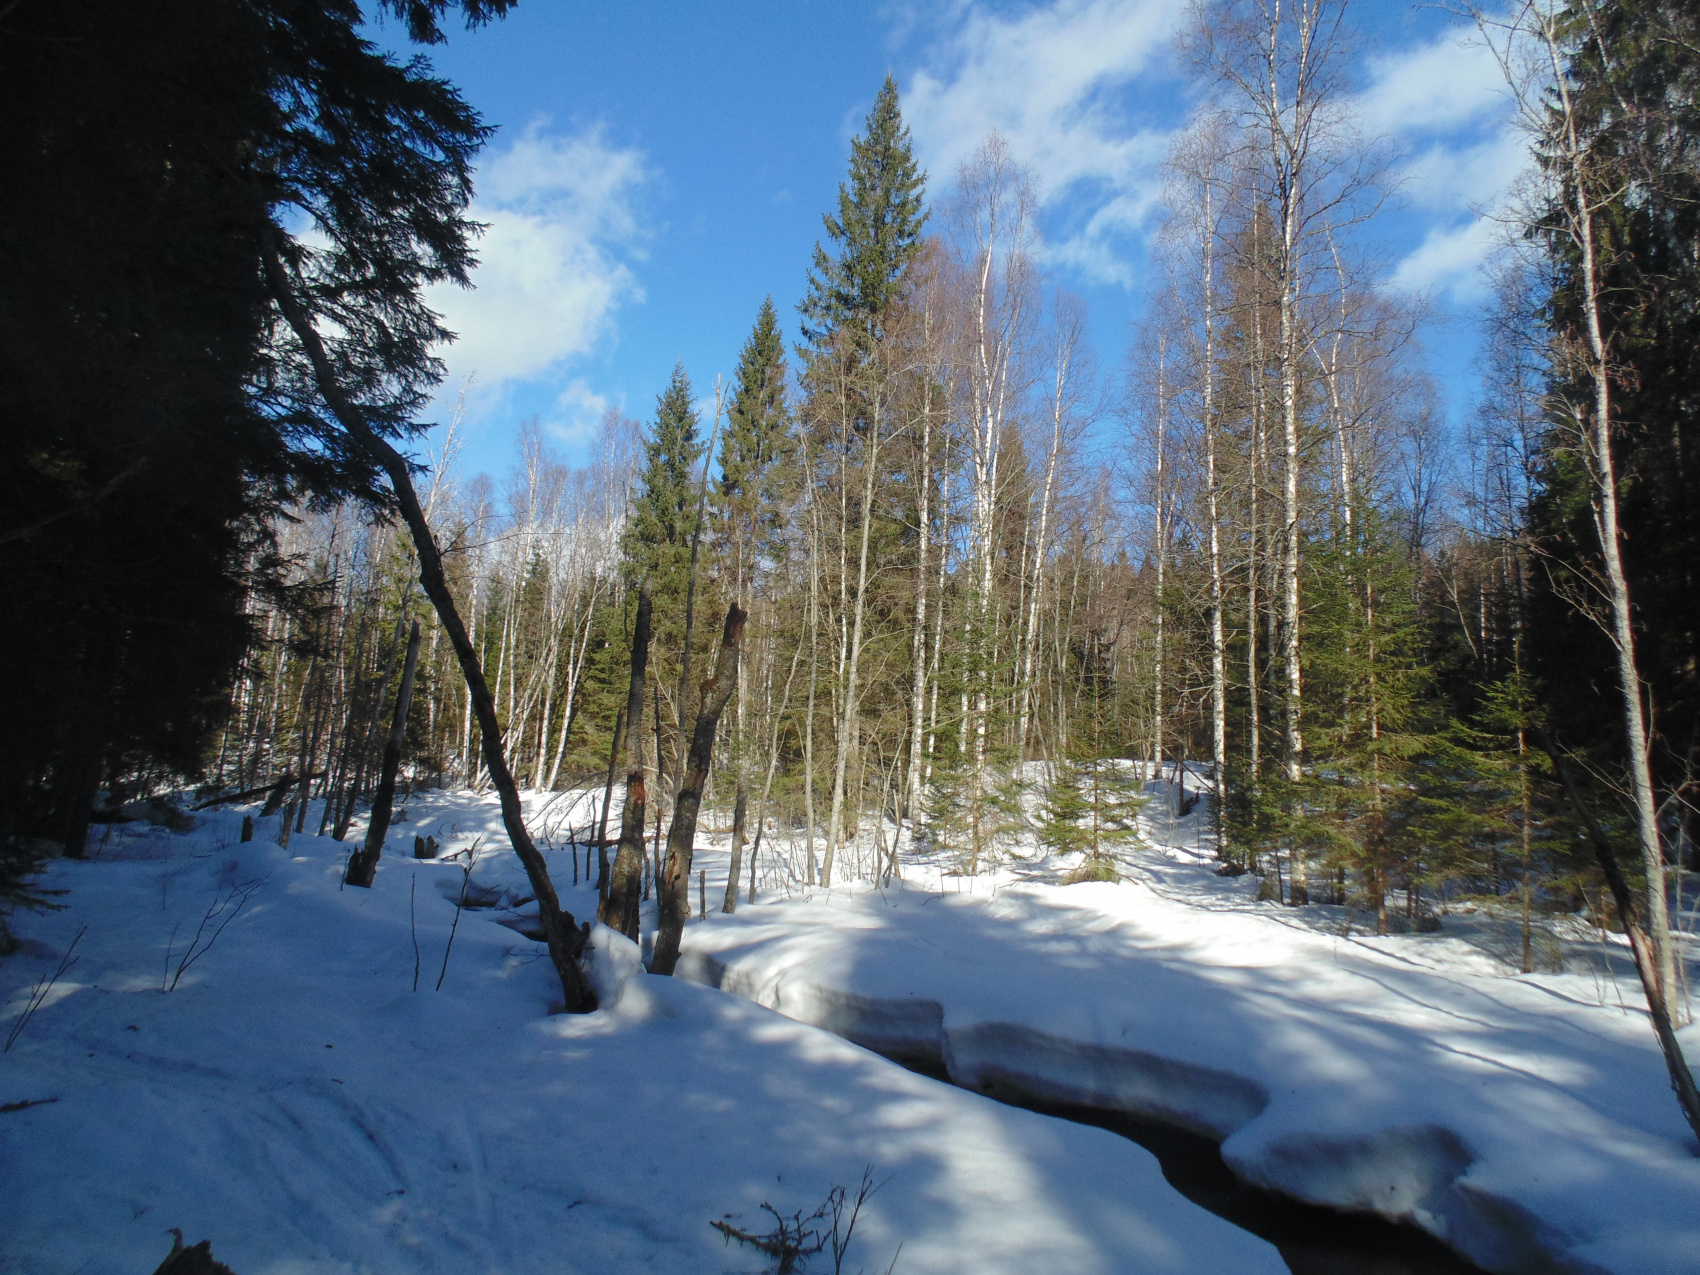 Ski Trip “In The Footsteps Of The Ski Arrow” From Orekhovo To